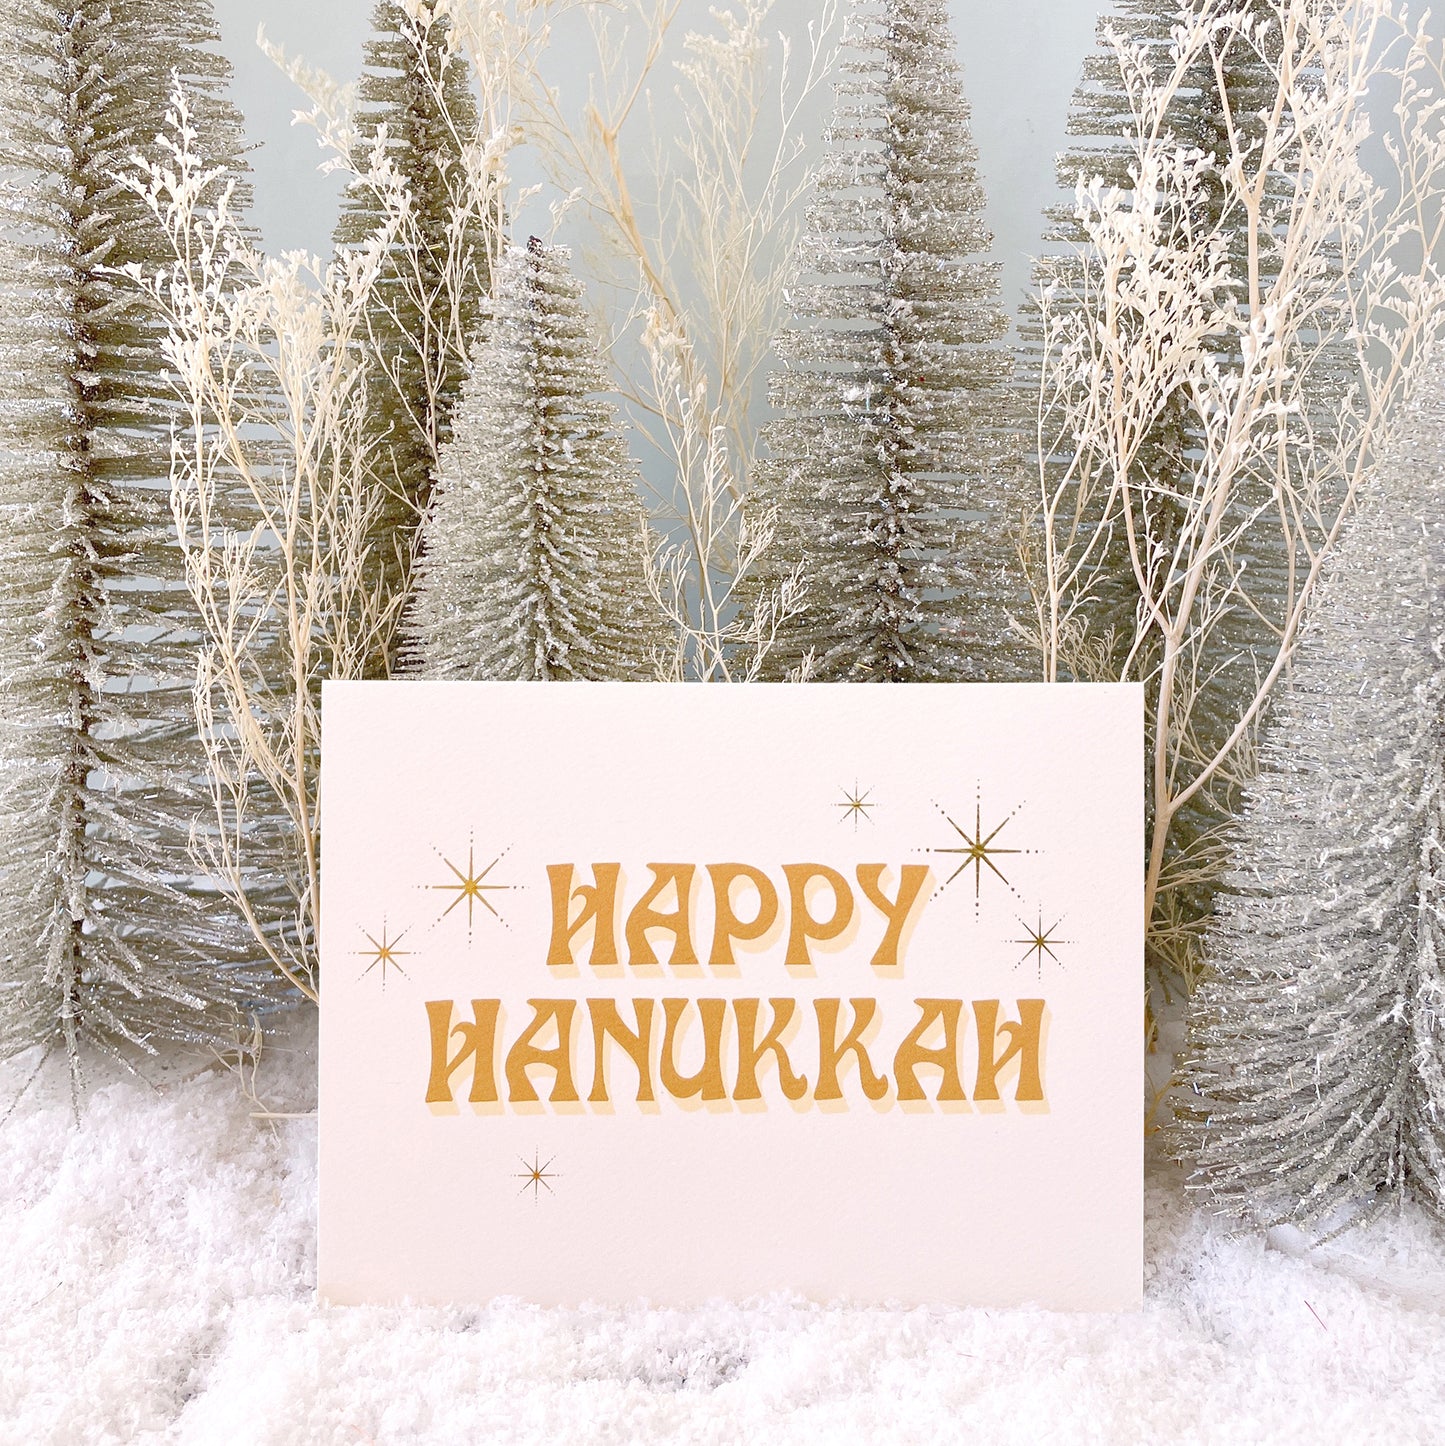 Ivory card that reads 'Happy Hanukkah' in retro orange lettering. The text is accented with gold foil stars twinkling around.